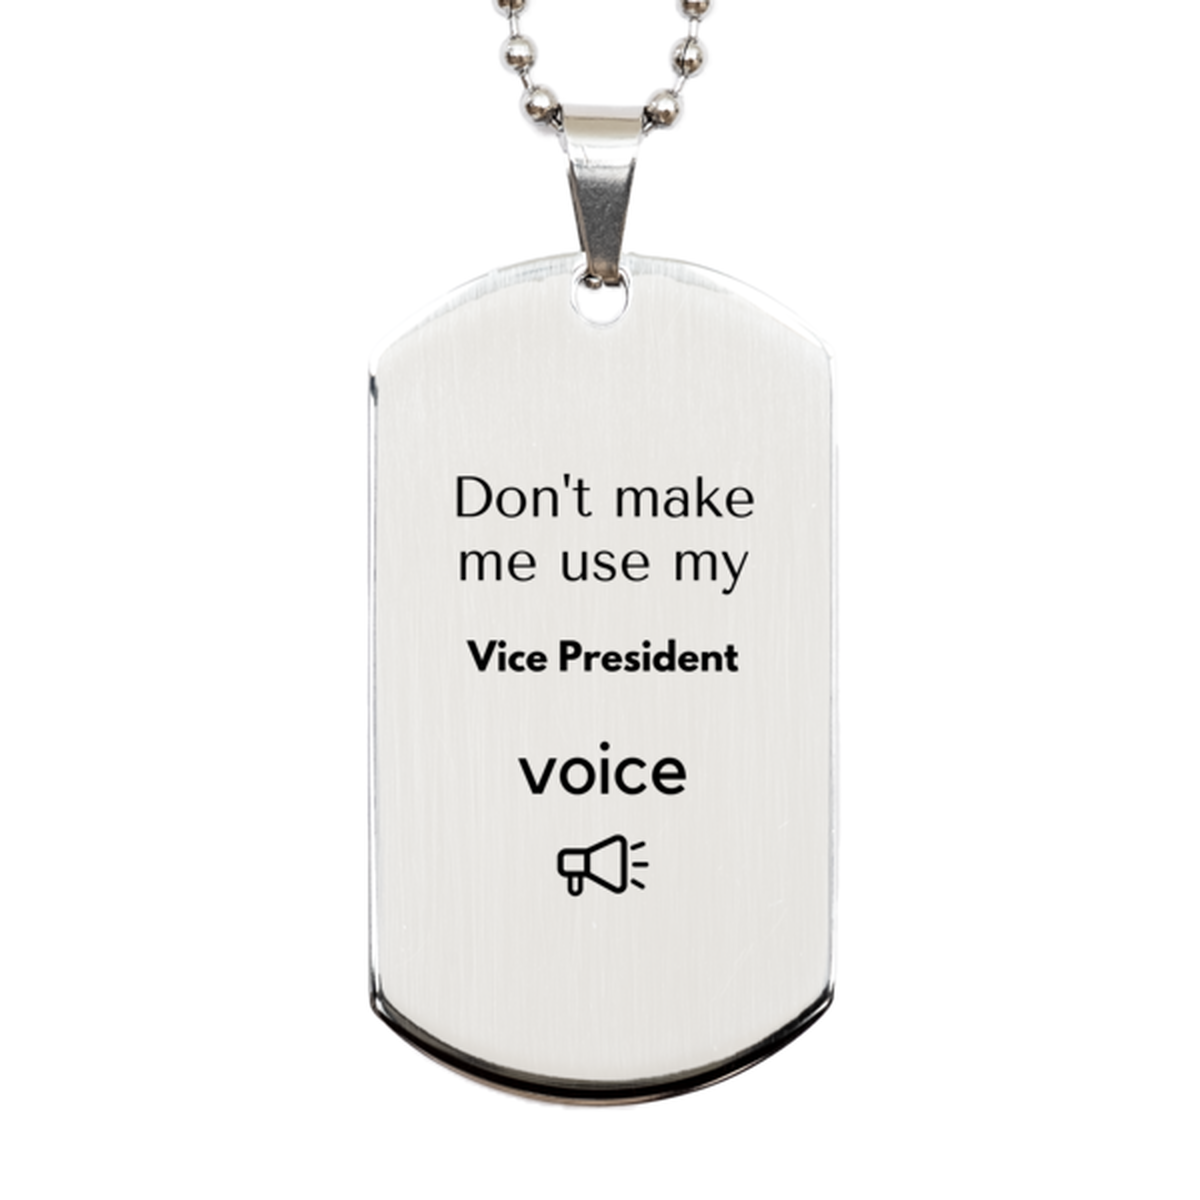 Don't make me use my Vice President voice, Sarcasm Vice President Gifts, Christmas Vice President Silver Dog Tag Birthday Unique Gifts For Vice President Coworkers, Men, Women, Colleague, Friends